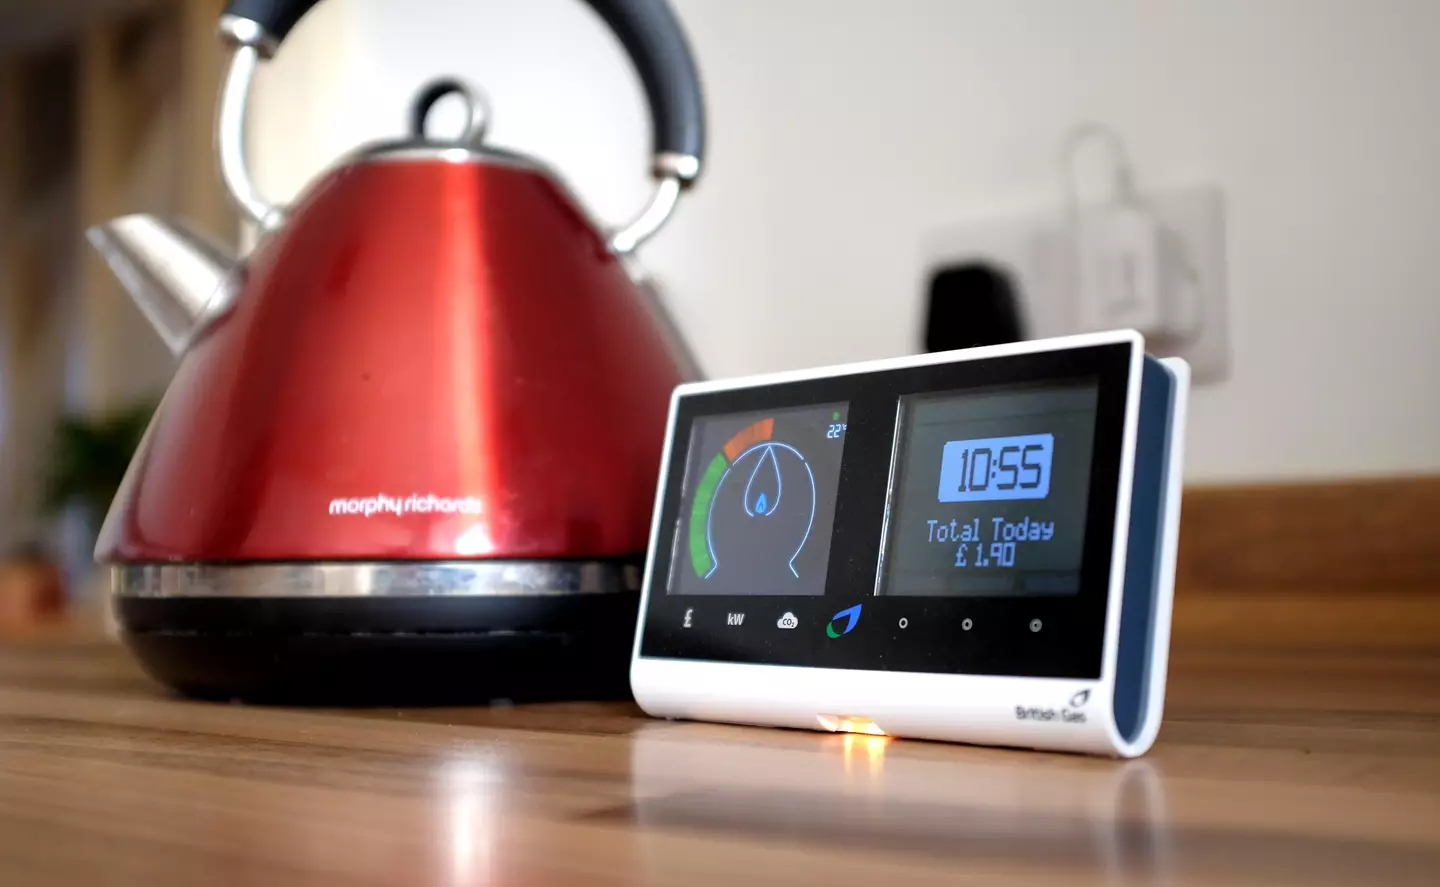 Energy bills in the UK are set to shoot up in October.